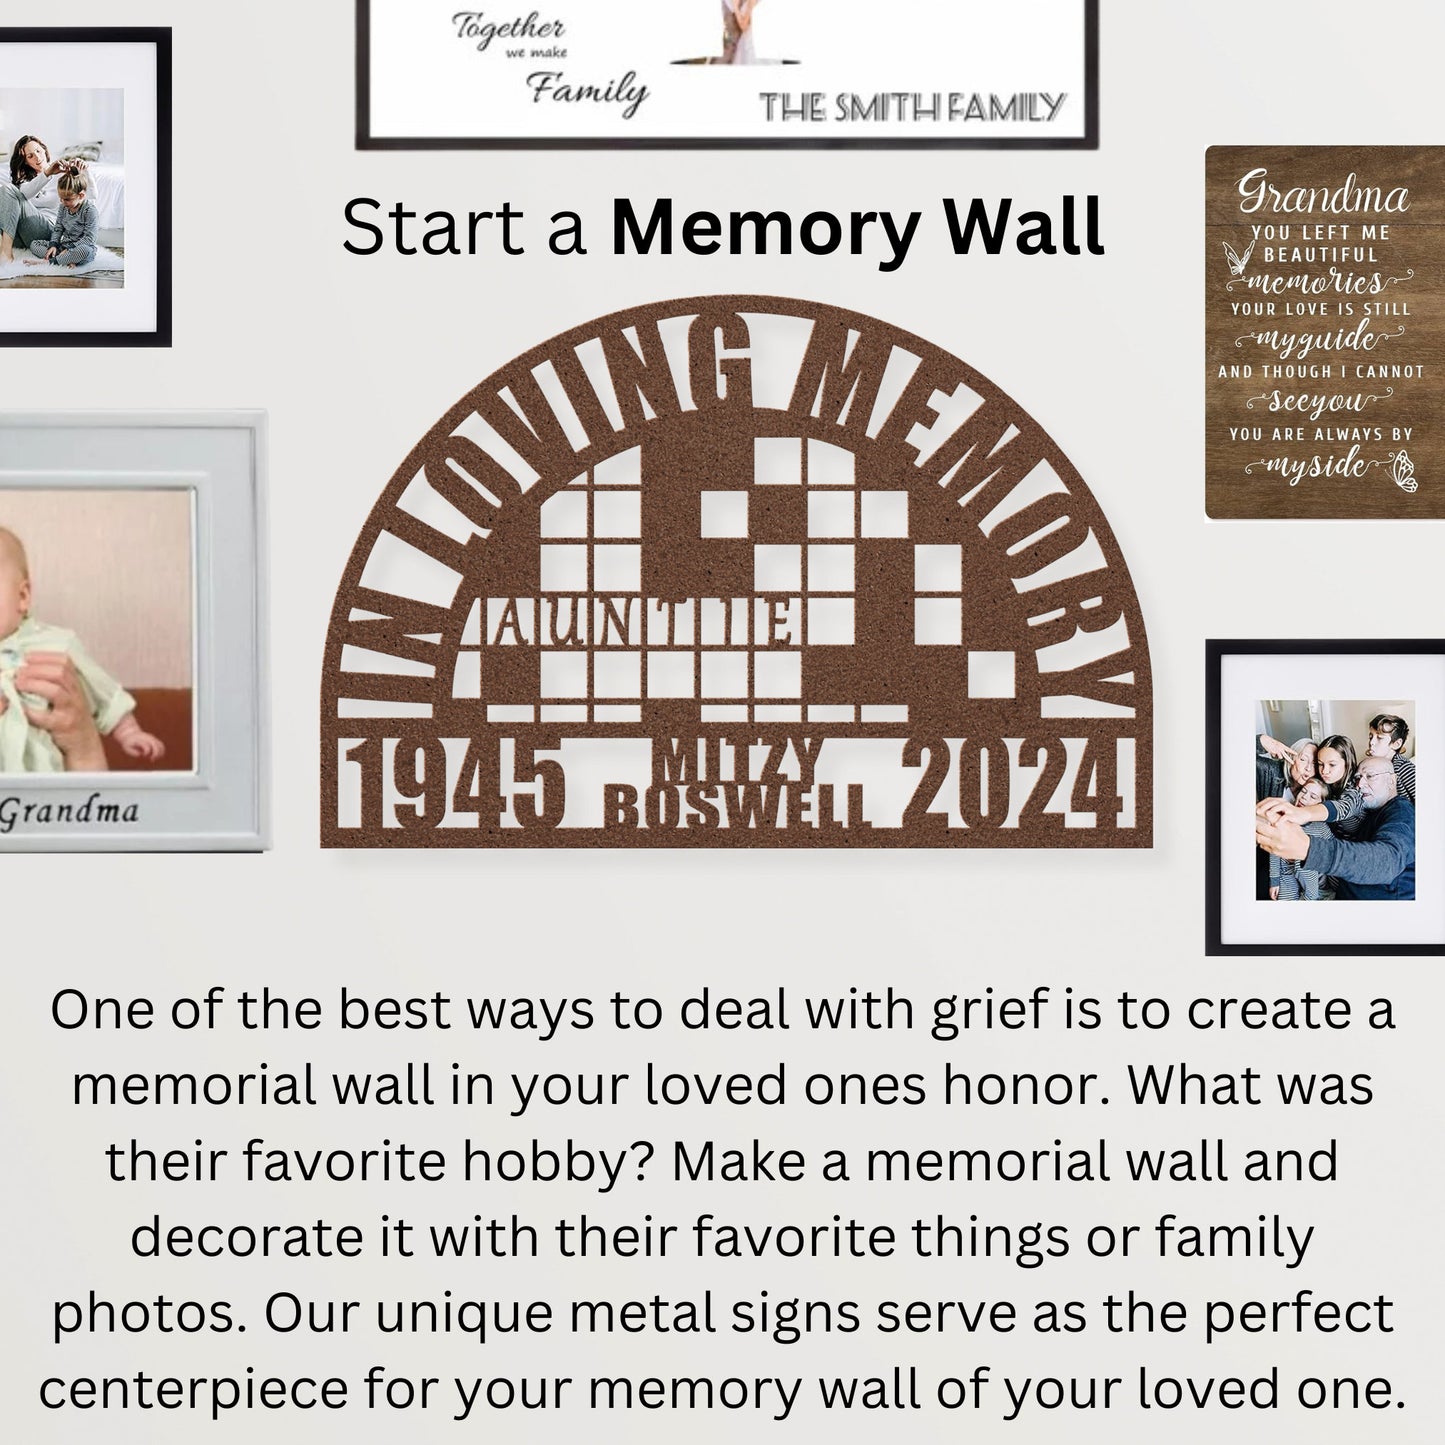 Unique Crossword Puzzle Memorial for Grandma - Personalized In Loving Memory Wall Sig Remembrance Sympathy Gift for Loss of Loved One